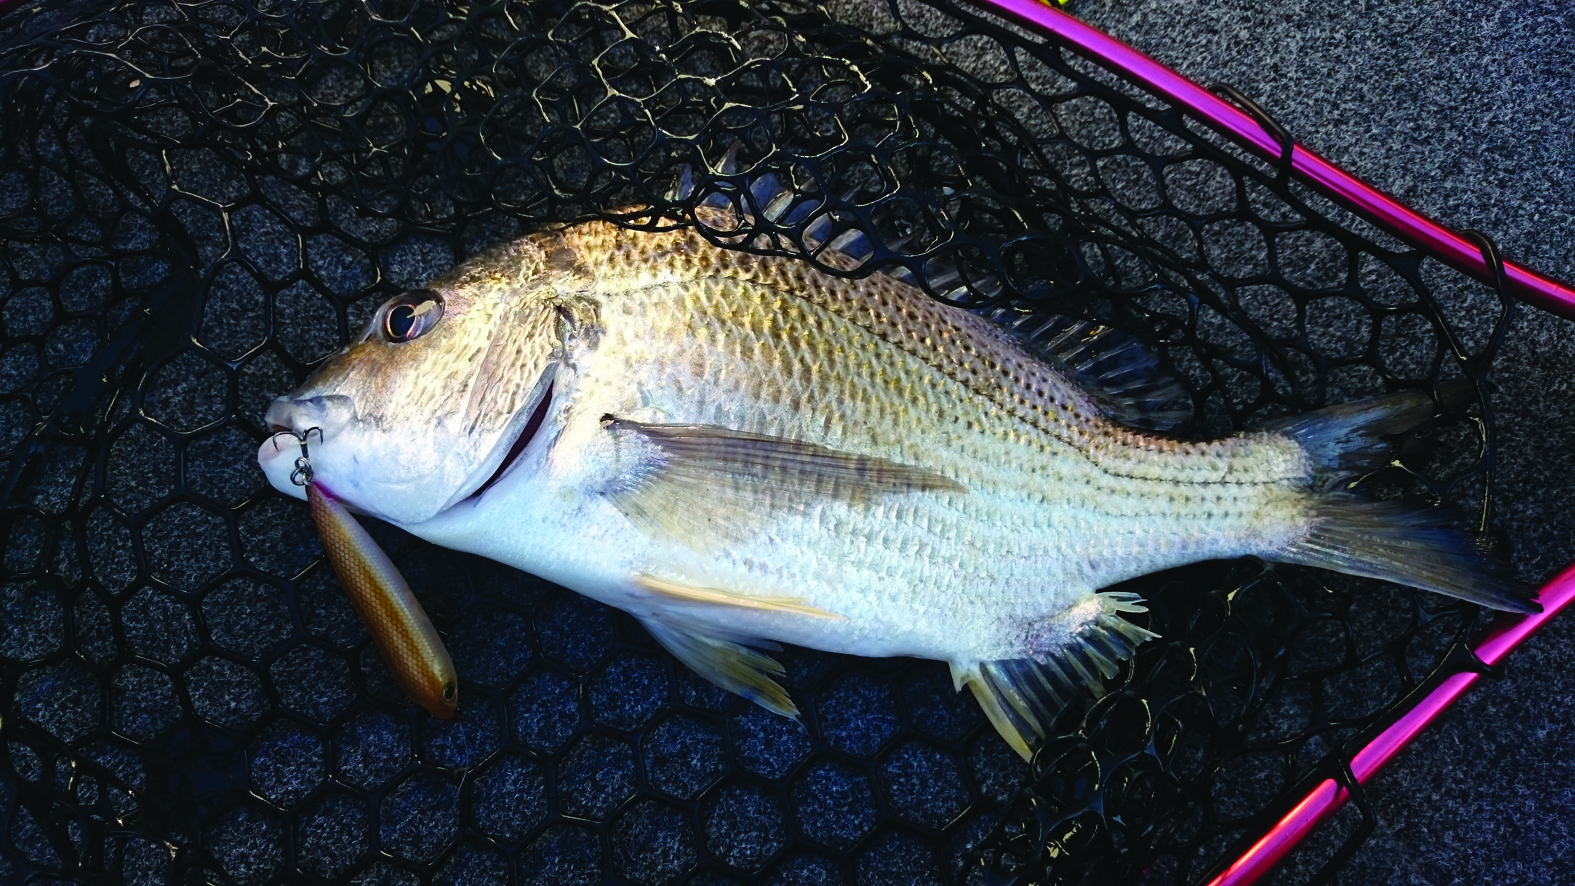 A quality bream that hit a Cultiva Zip ‘n Ziggy on the surface.